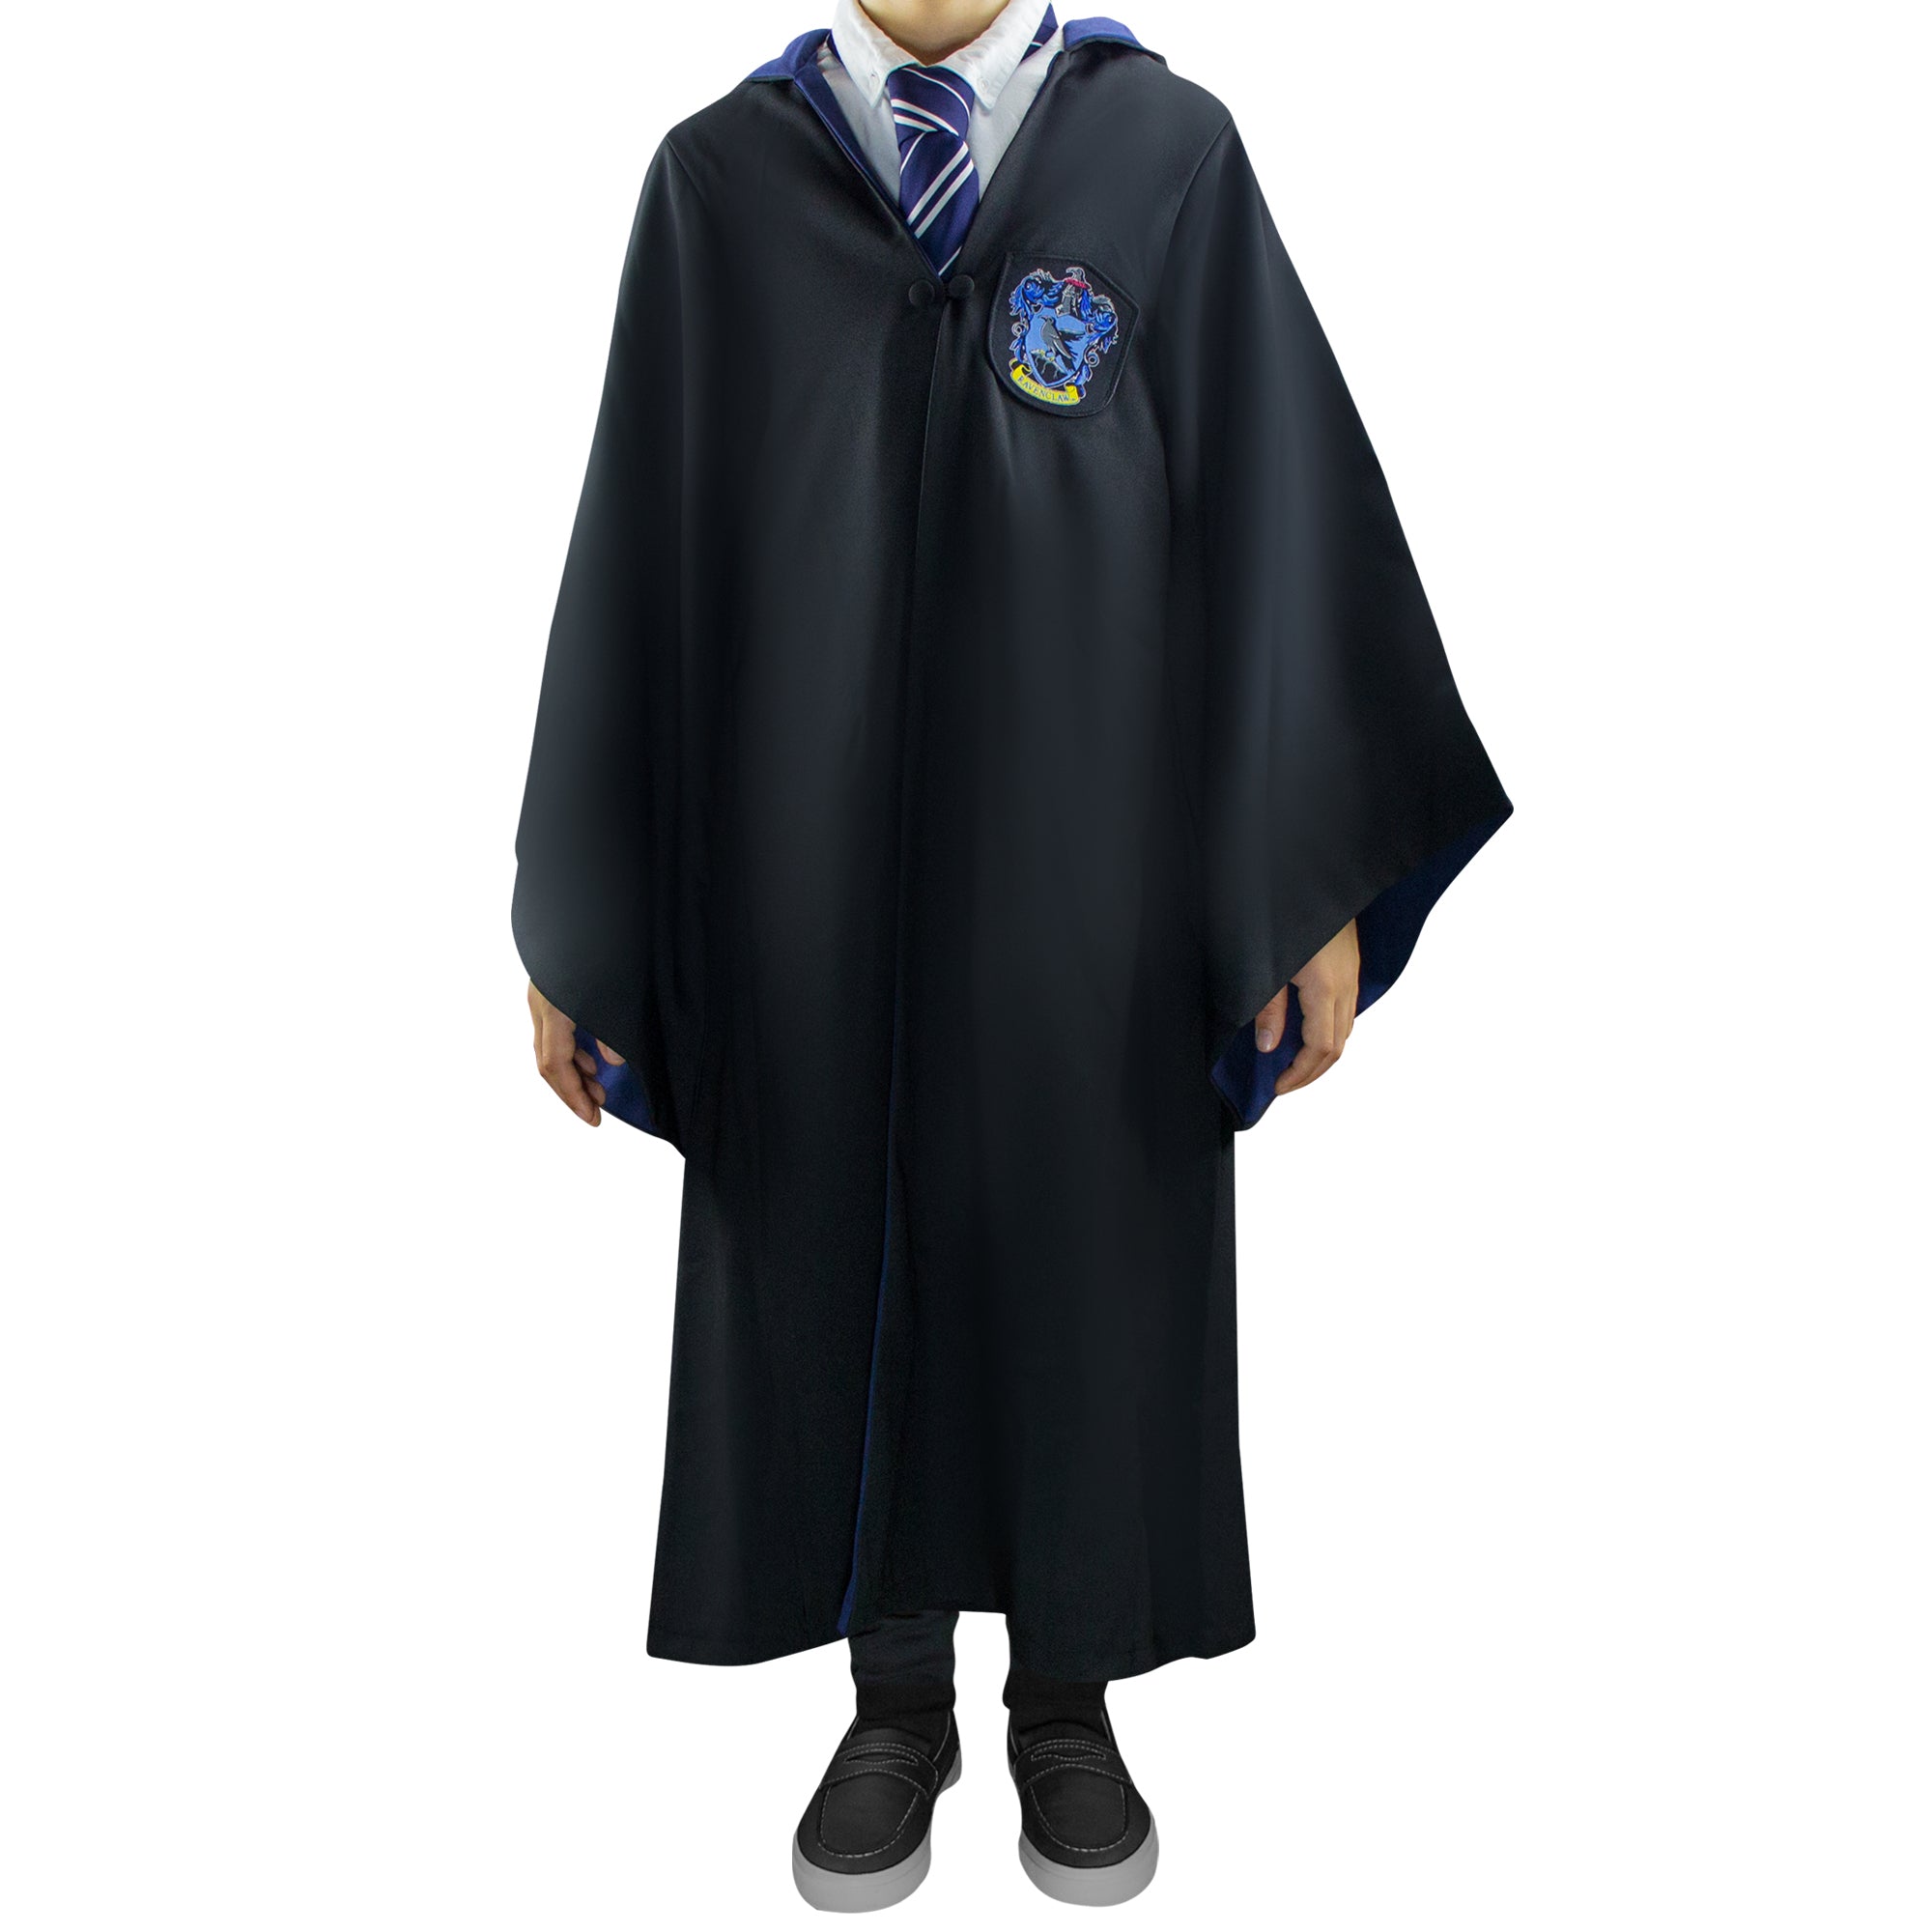 Adult Harry Potter Deluxe Ravenclaw Robe Costume  Harry potter robes,  Ravenclaw scarf, Harry potter